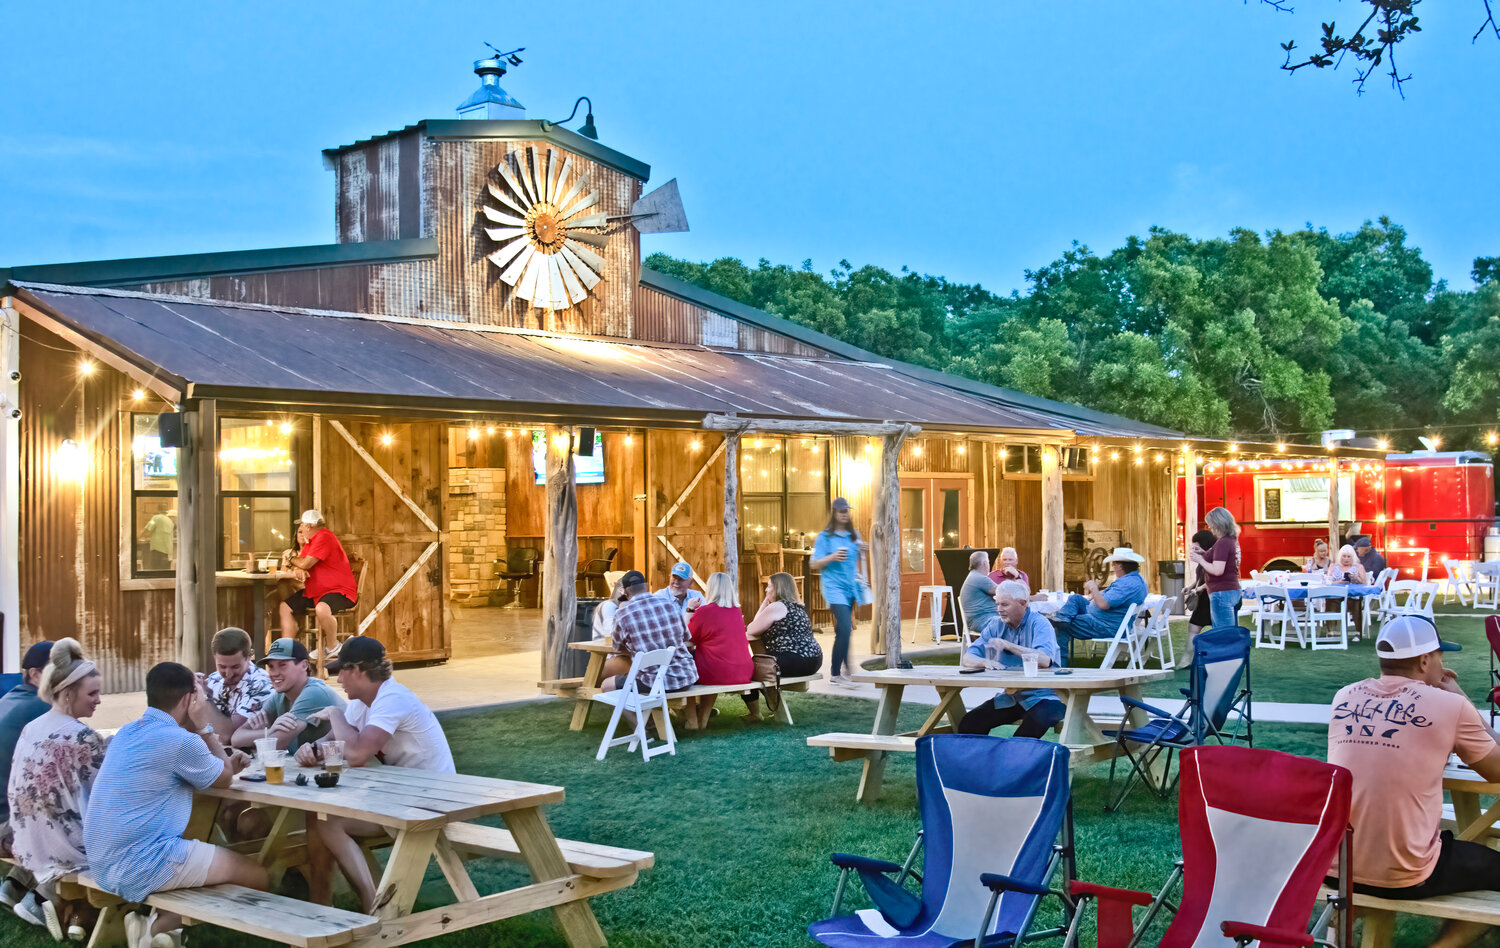 A PLACE TO RELAX: The new Warren's Backyard offers a bar, outdoor seating under lighted oak trees, food truck fare, games, and a stage for live band performances.